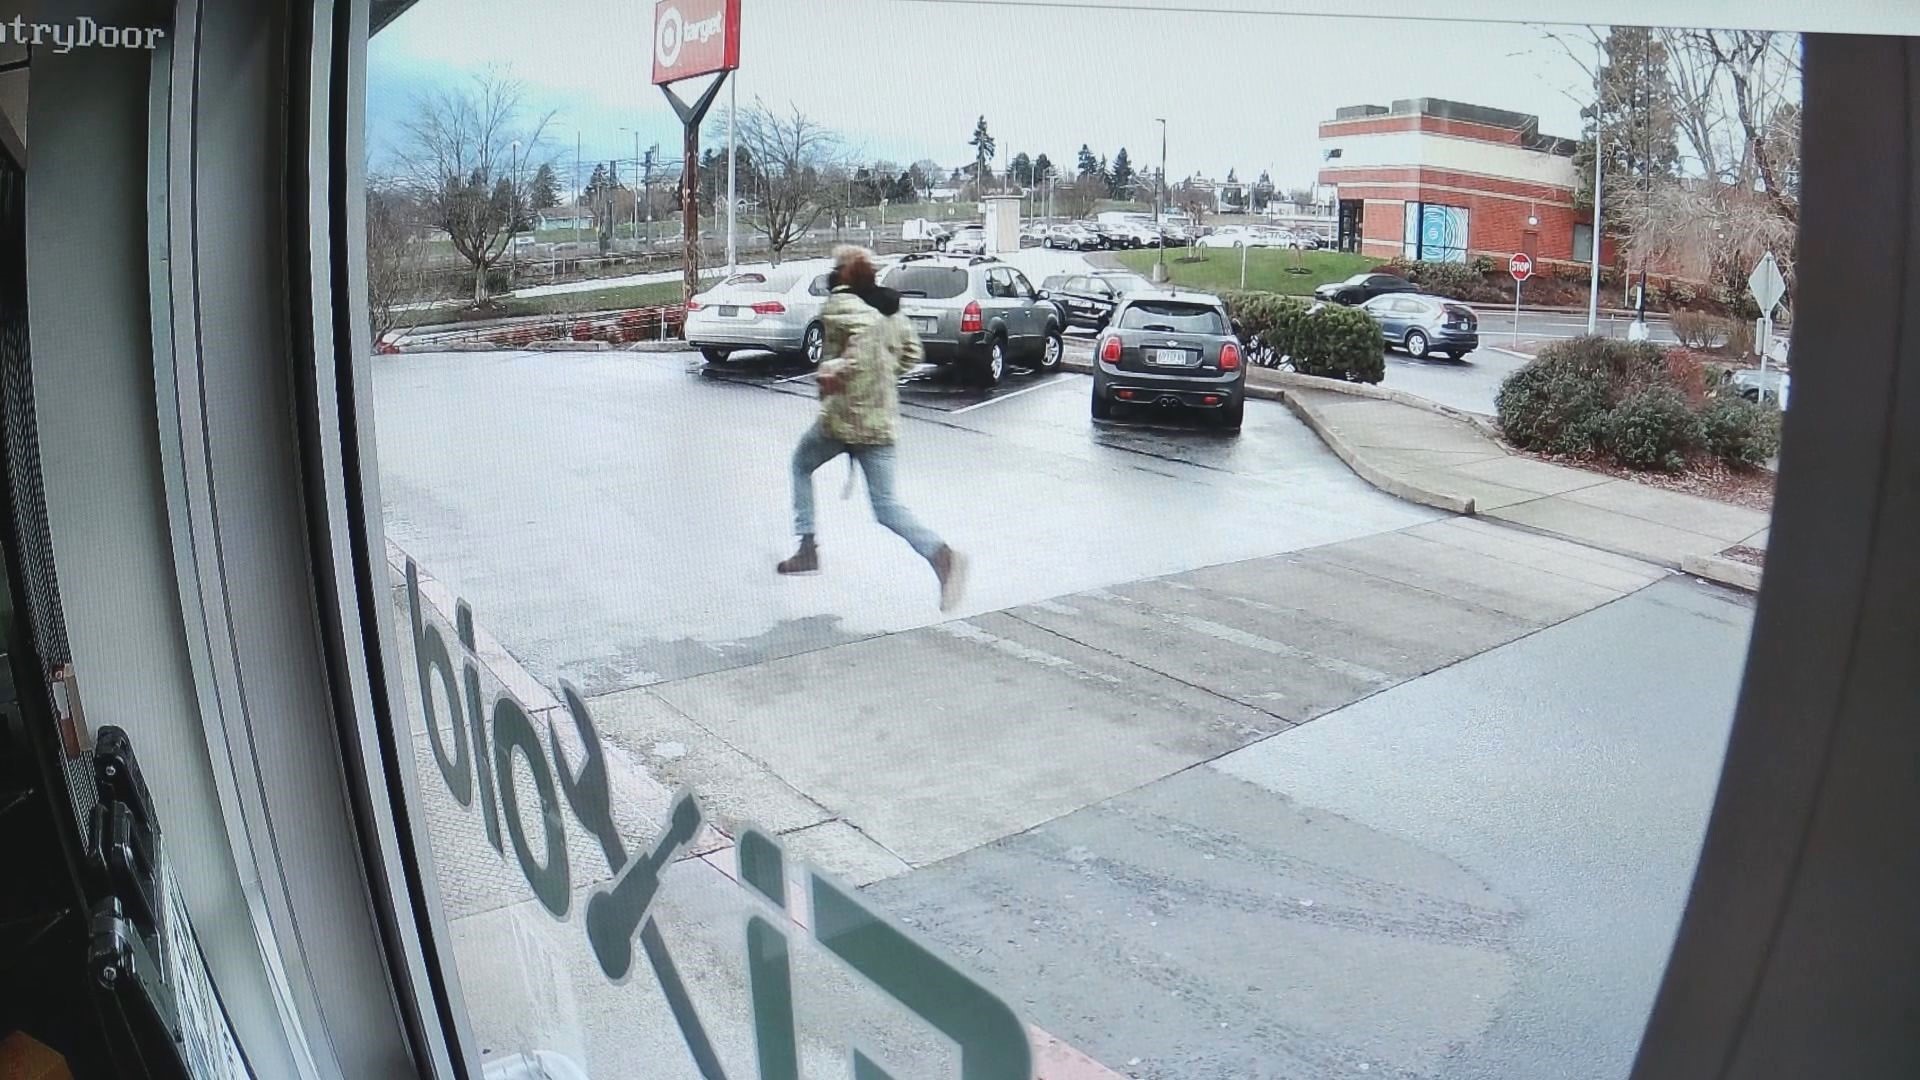 Surveillance video from a nearby storefront shows a robbery suspect running across the Mall 205 parking lot moments before he was shot by police.